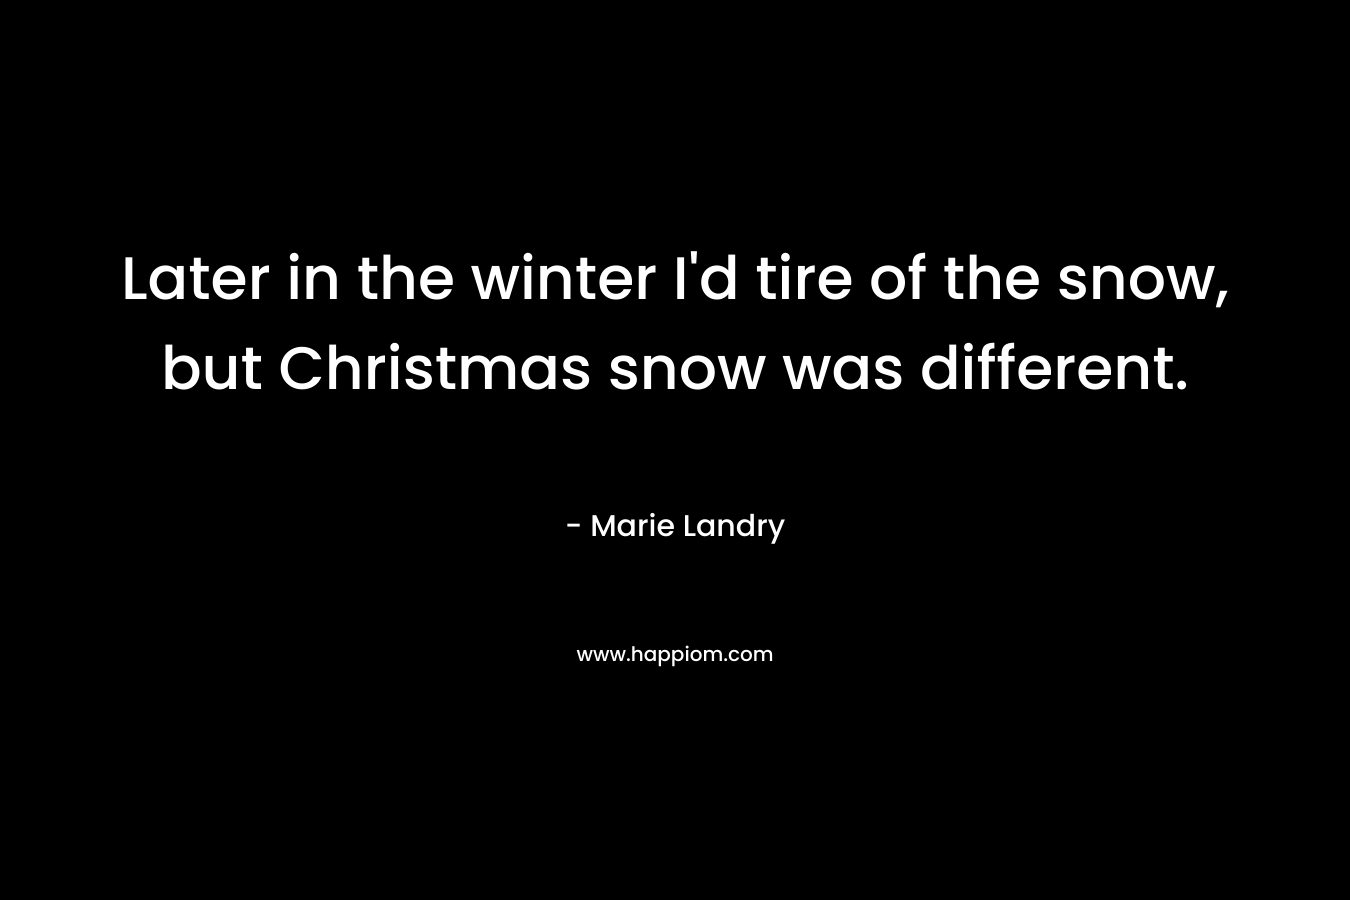 Later in the winter I’d tire of the snow, but Christmas snow was different. – Marie Landry